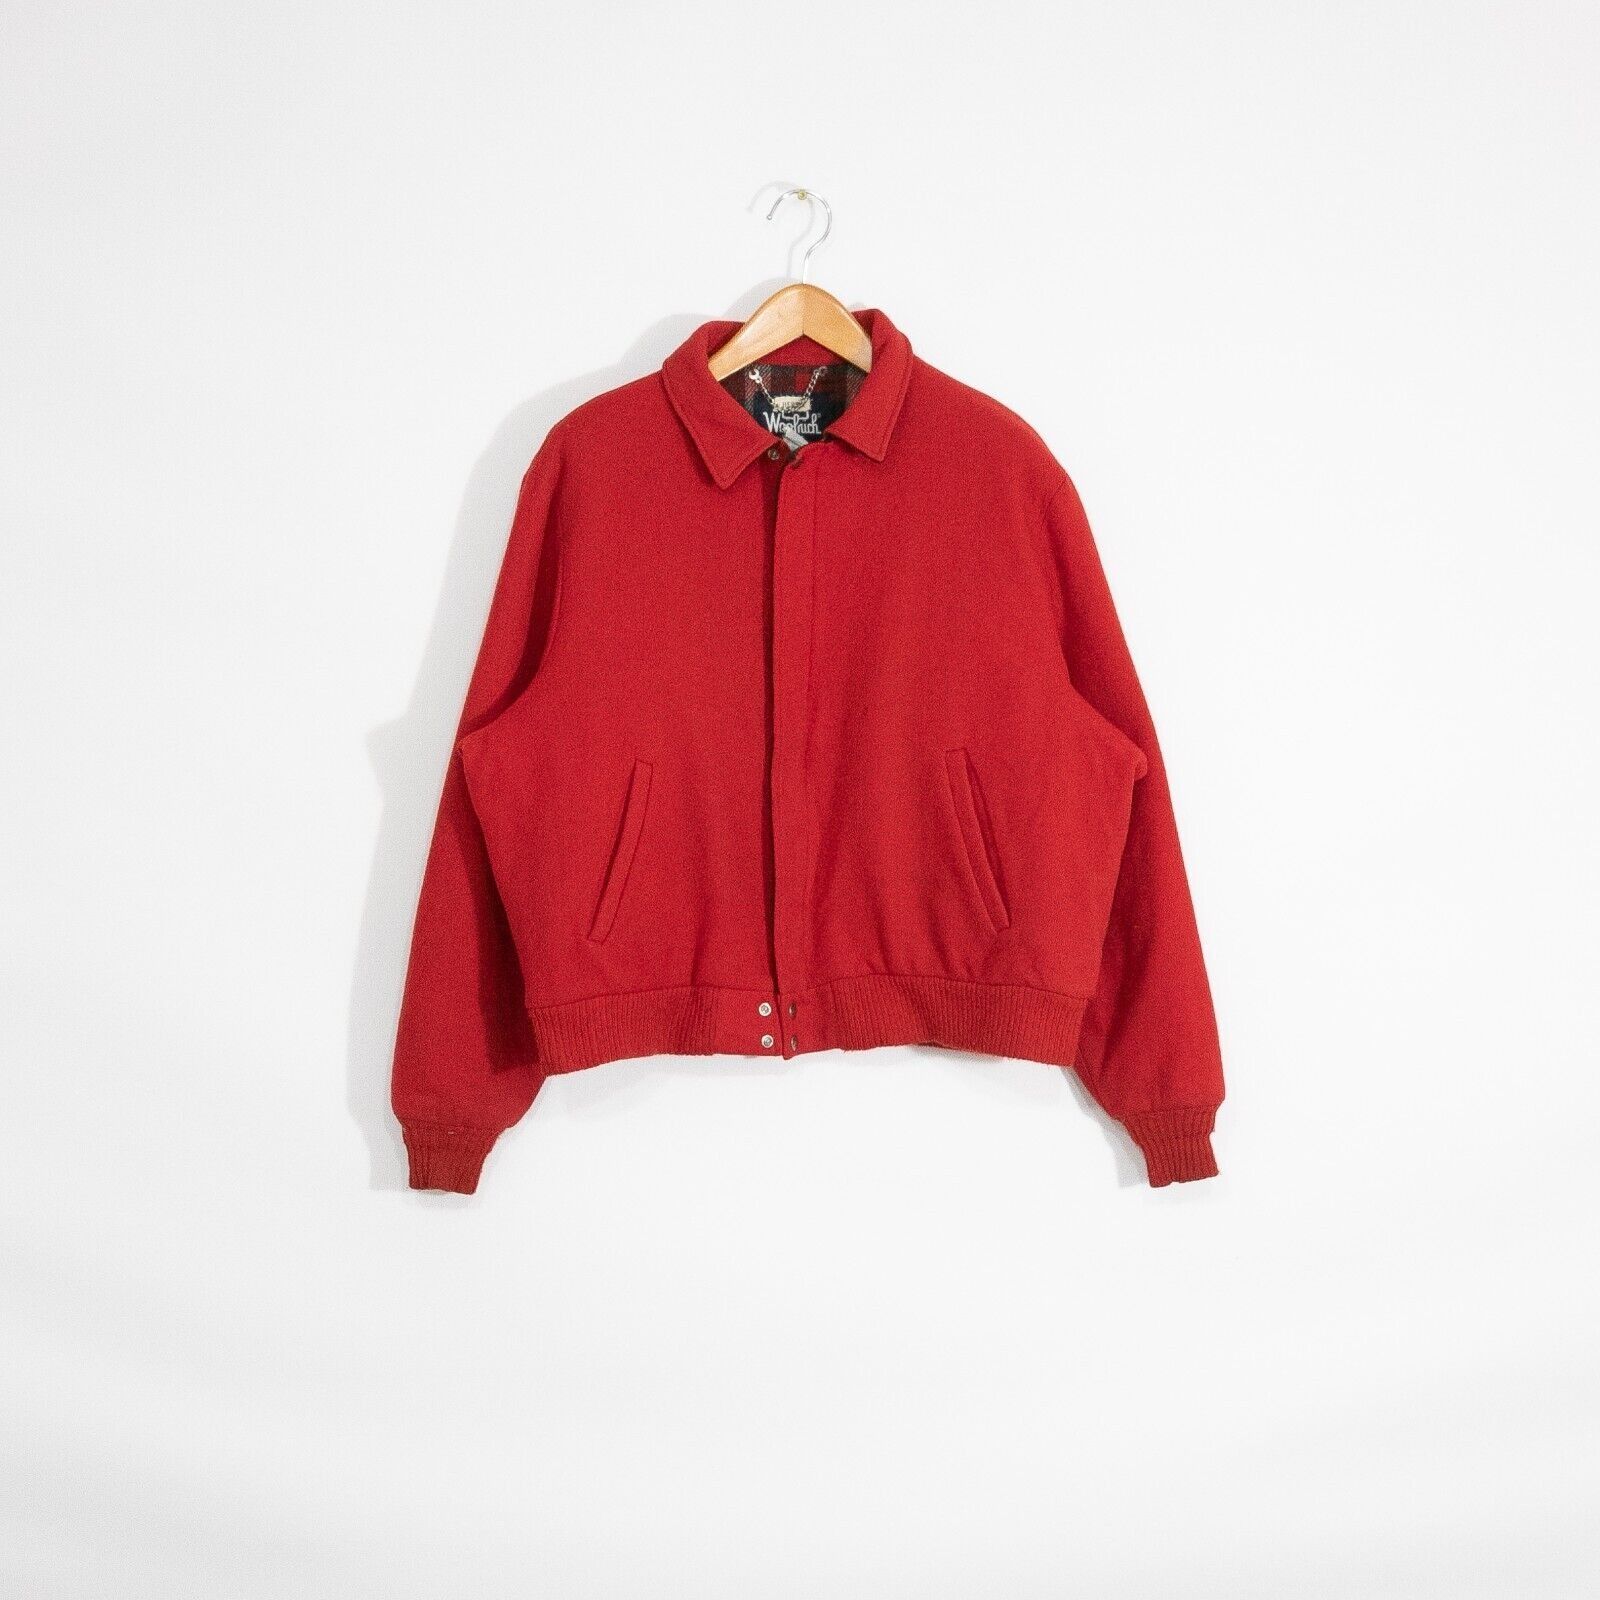 Vintage Vintage 80s Woolrich Bomber Jacket Mens XL Red Wool Flannel Size US XL / EU 56 / 4 - 1 Preview